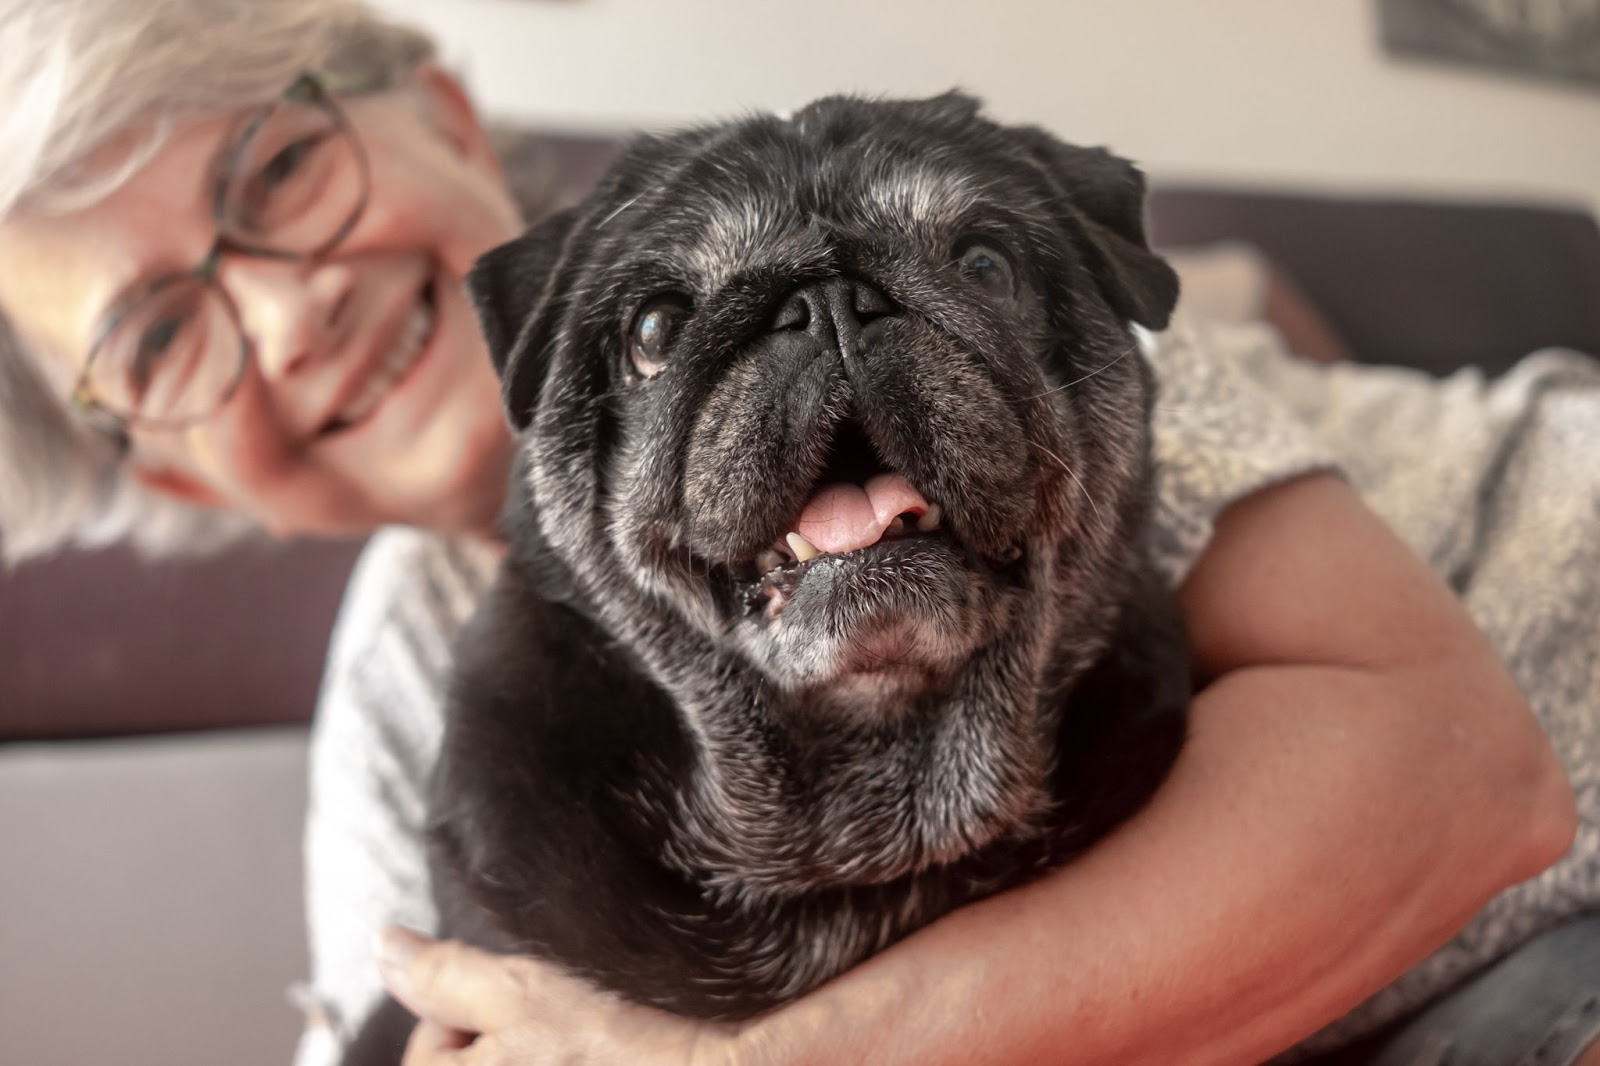 An elderly woman smiles with her arm around a black dog.